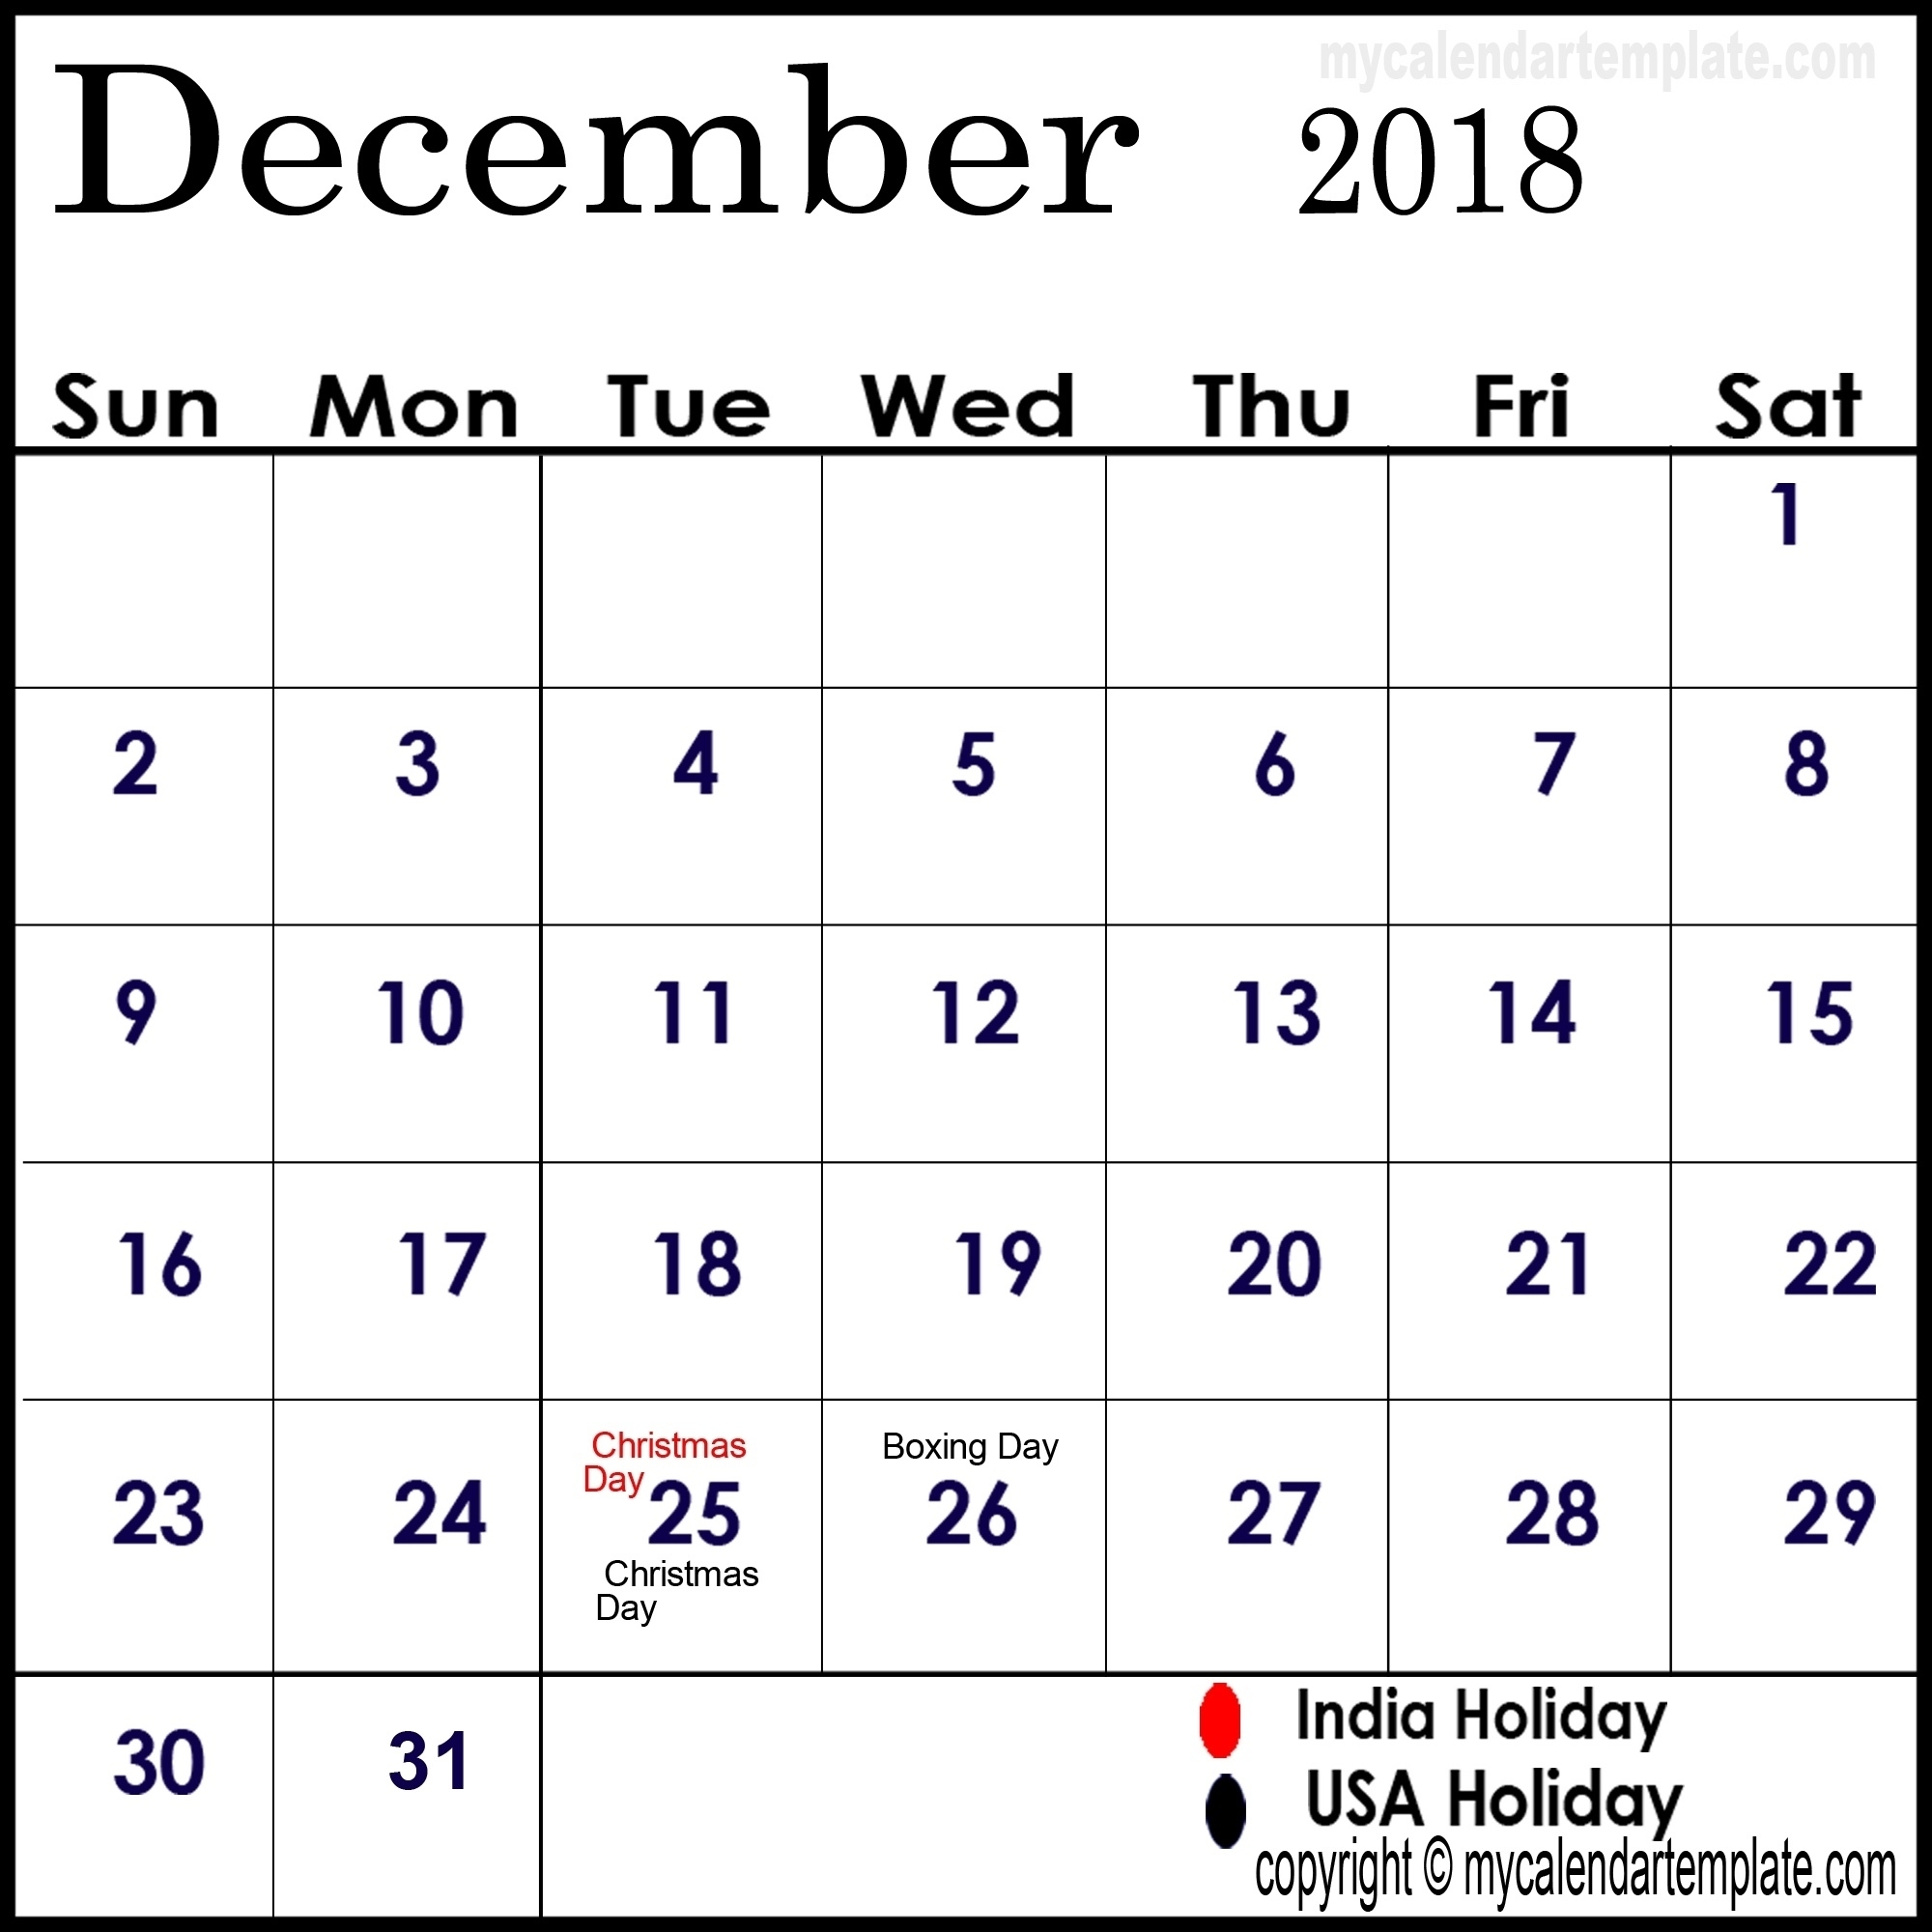 December 2018 Calendar With Holidays | Free Template Calendar Of Holidays In December